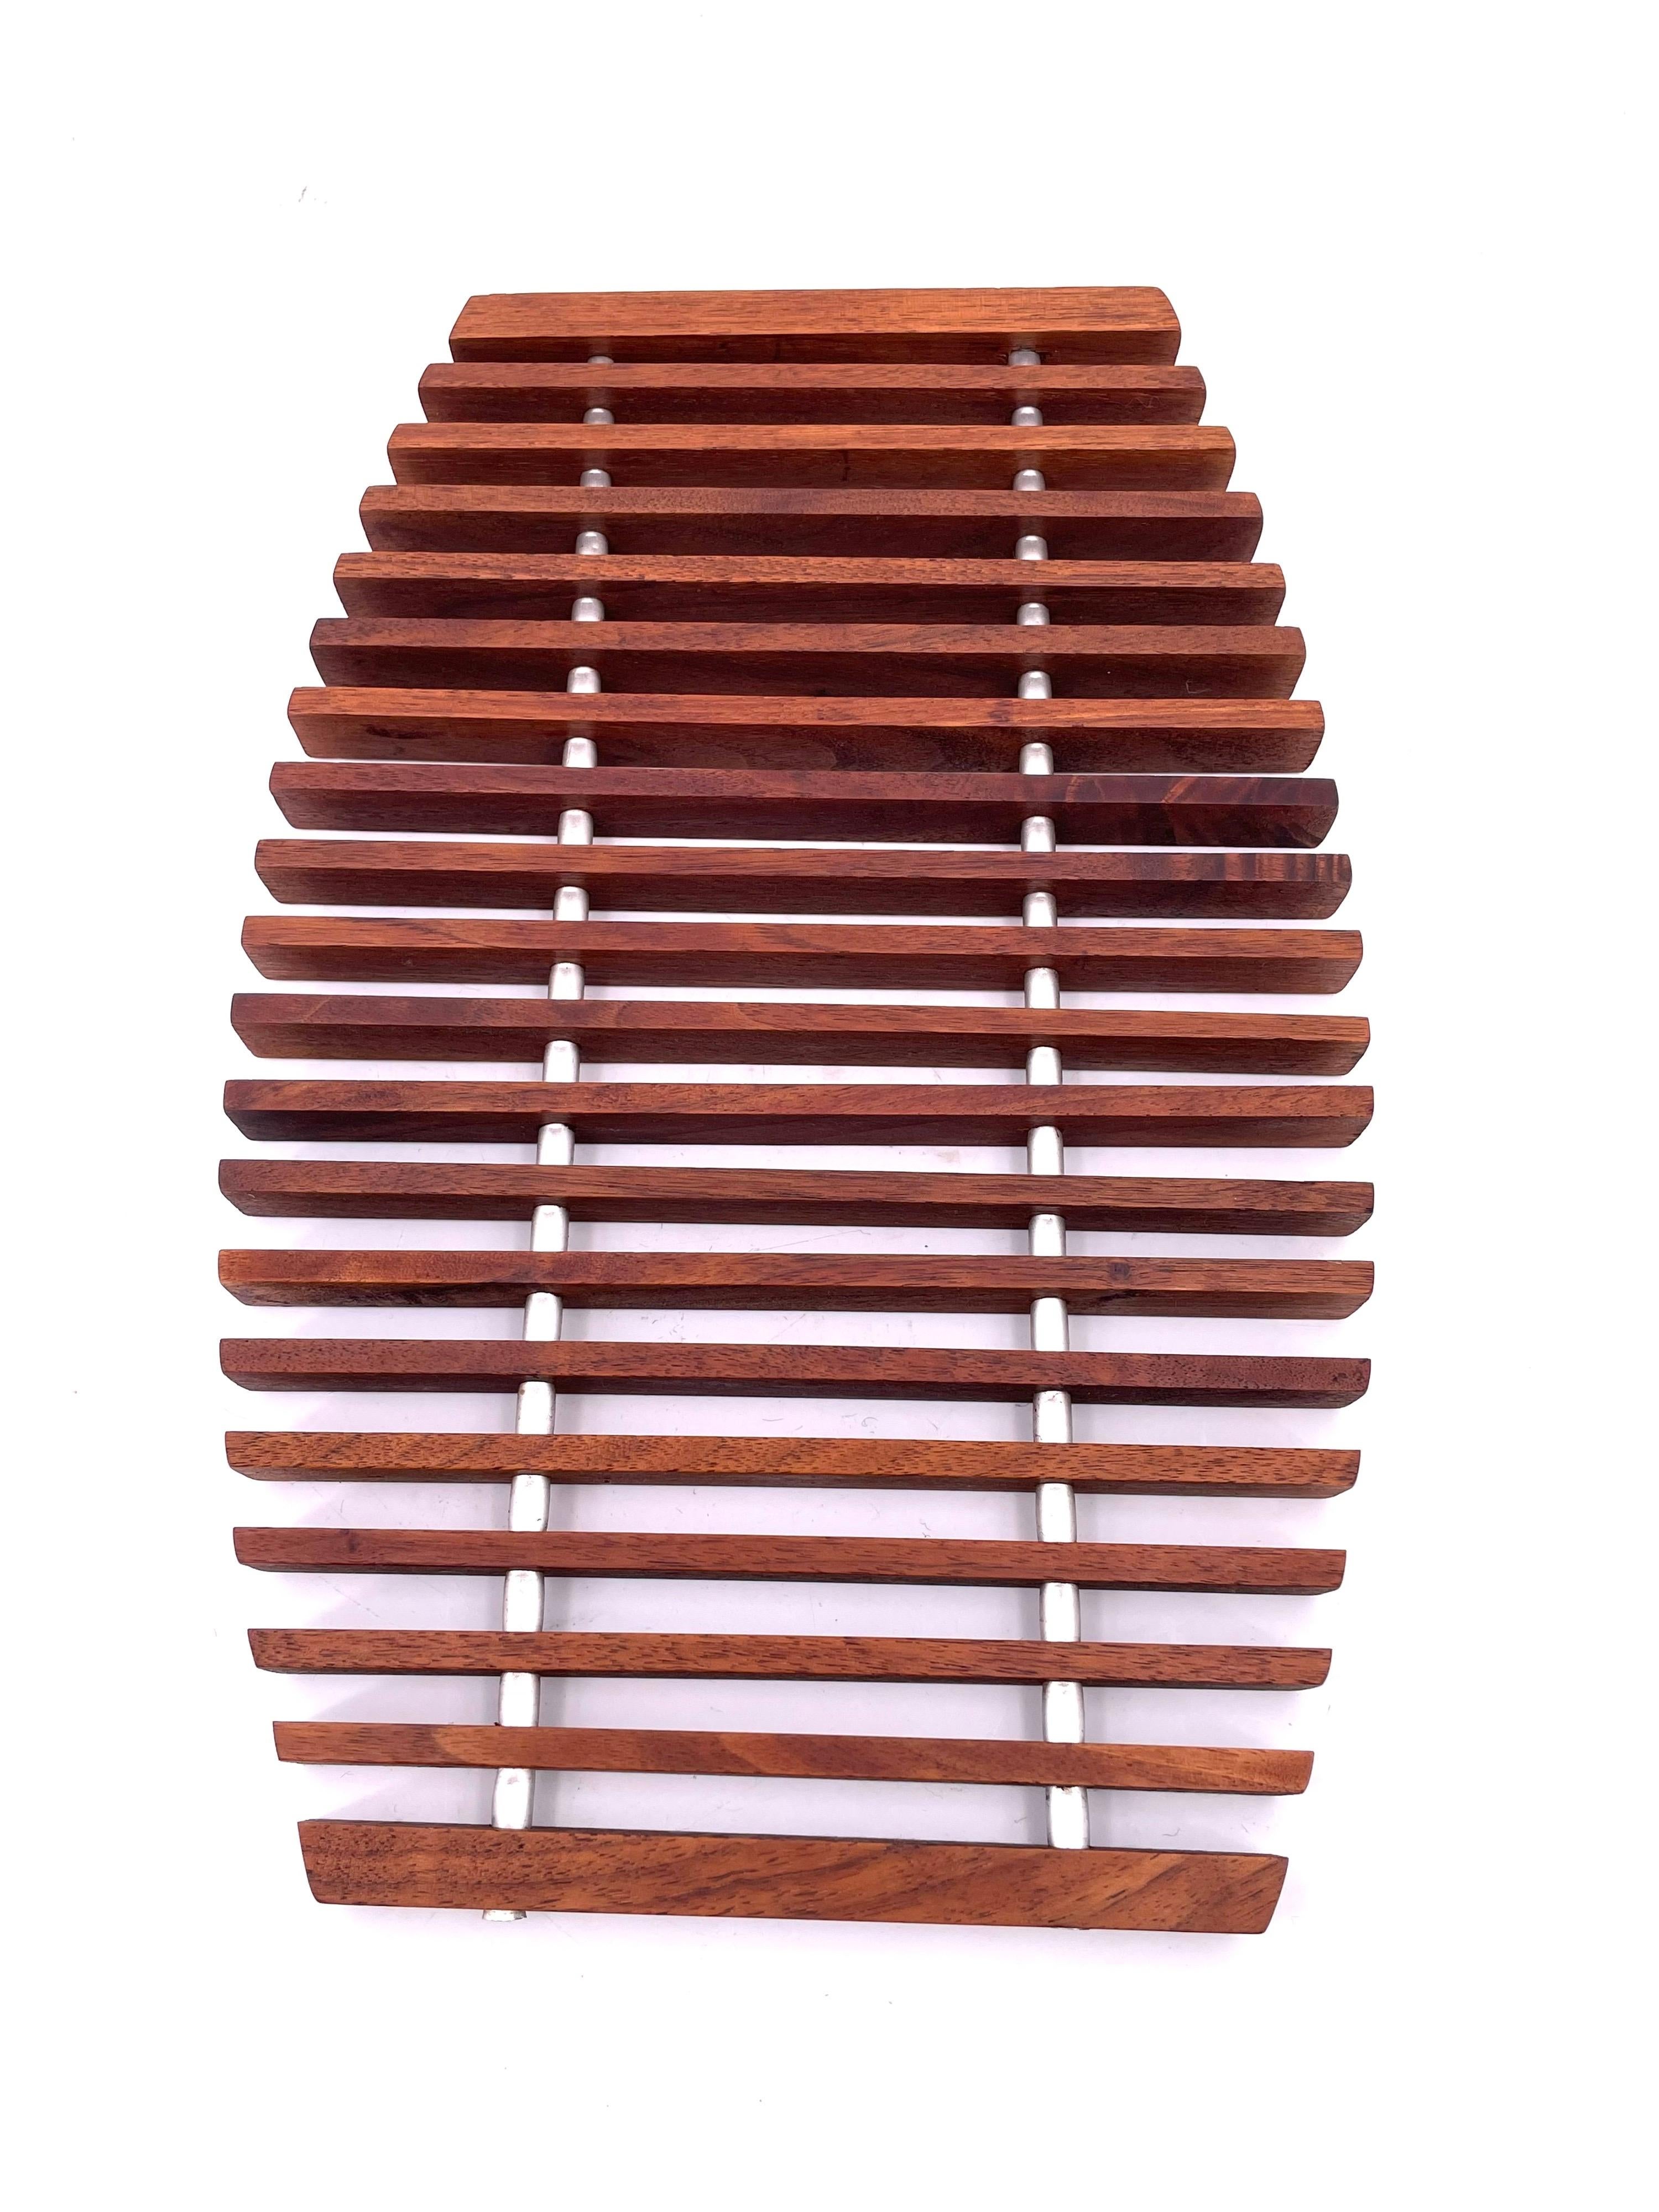 Beautiful solid teak rare trivet tray in solid teak with parallel aluminum rods that hold the bars in place, circa 1960's.